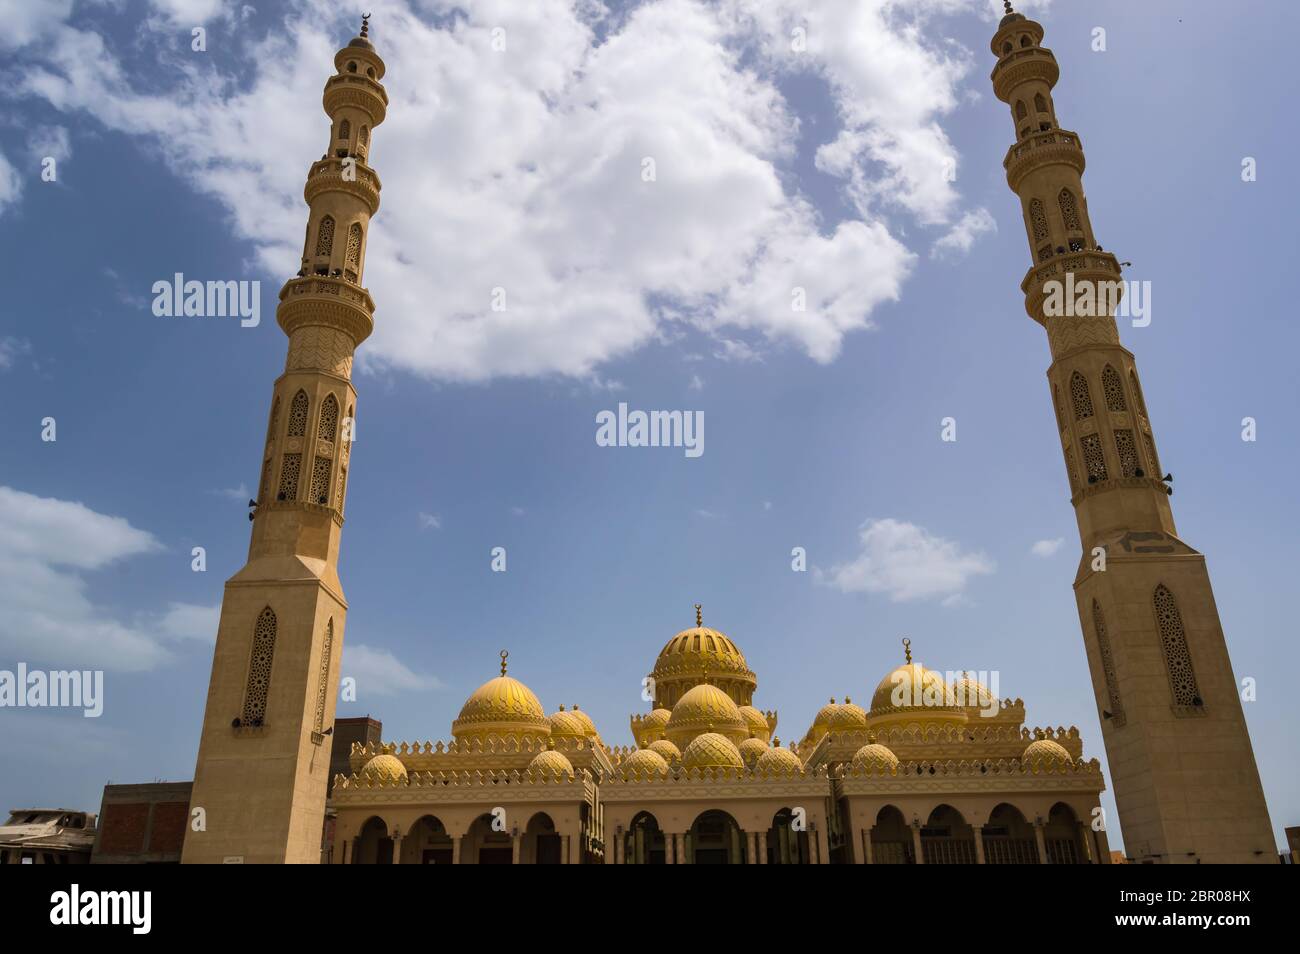 View of Al Mina Masjid Mosque in the port city of Hurghada in Egypt Stock Photo